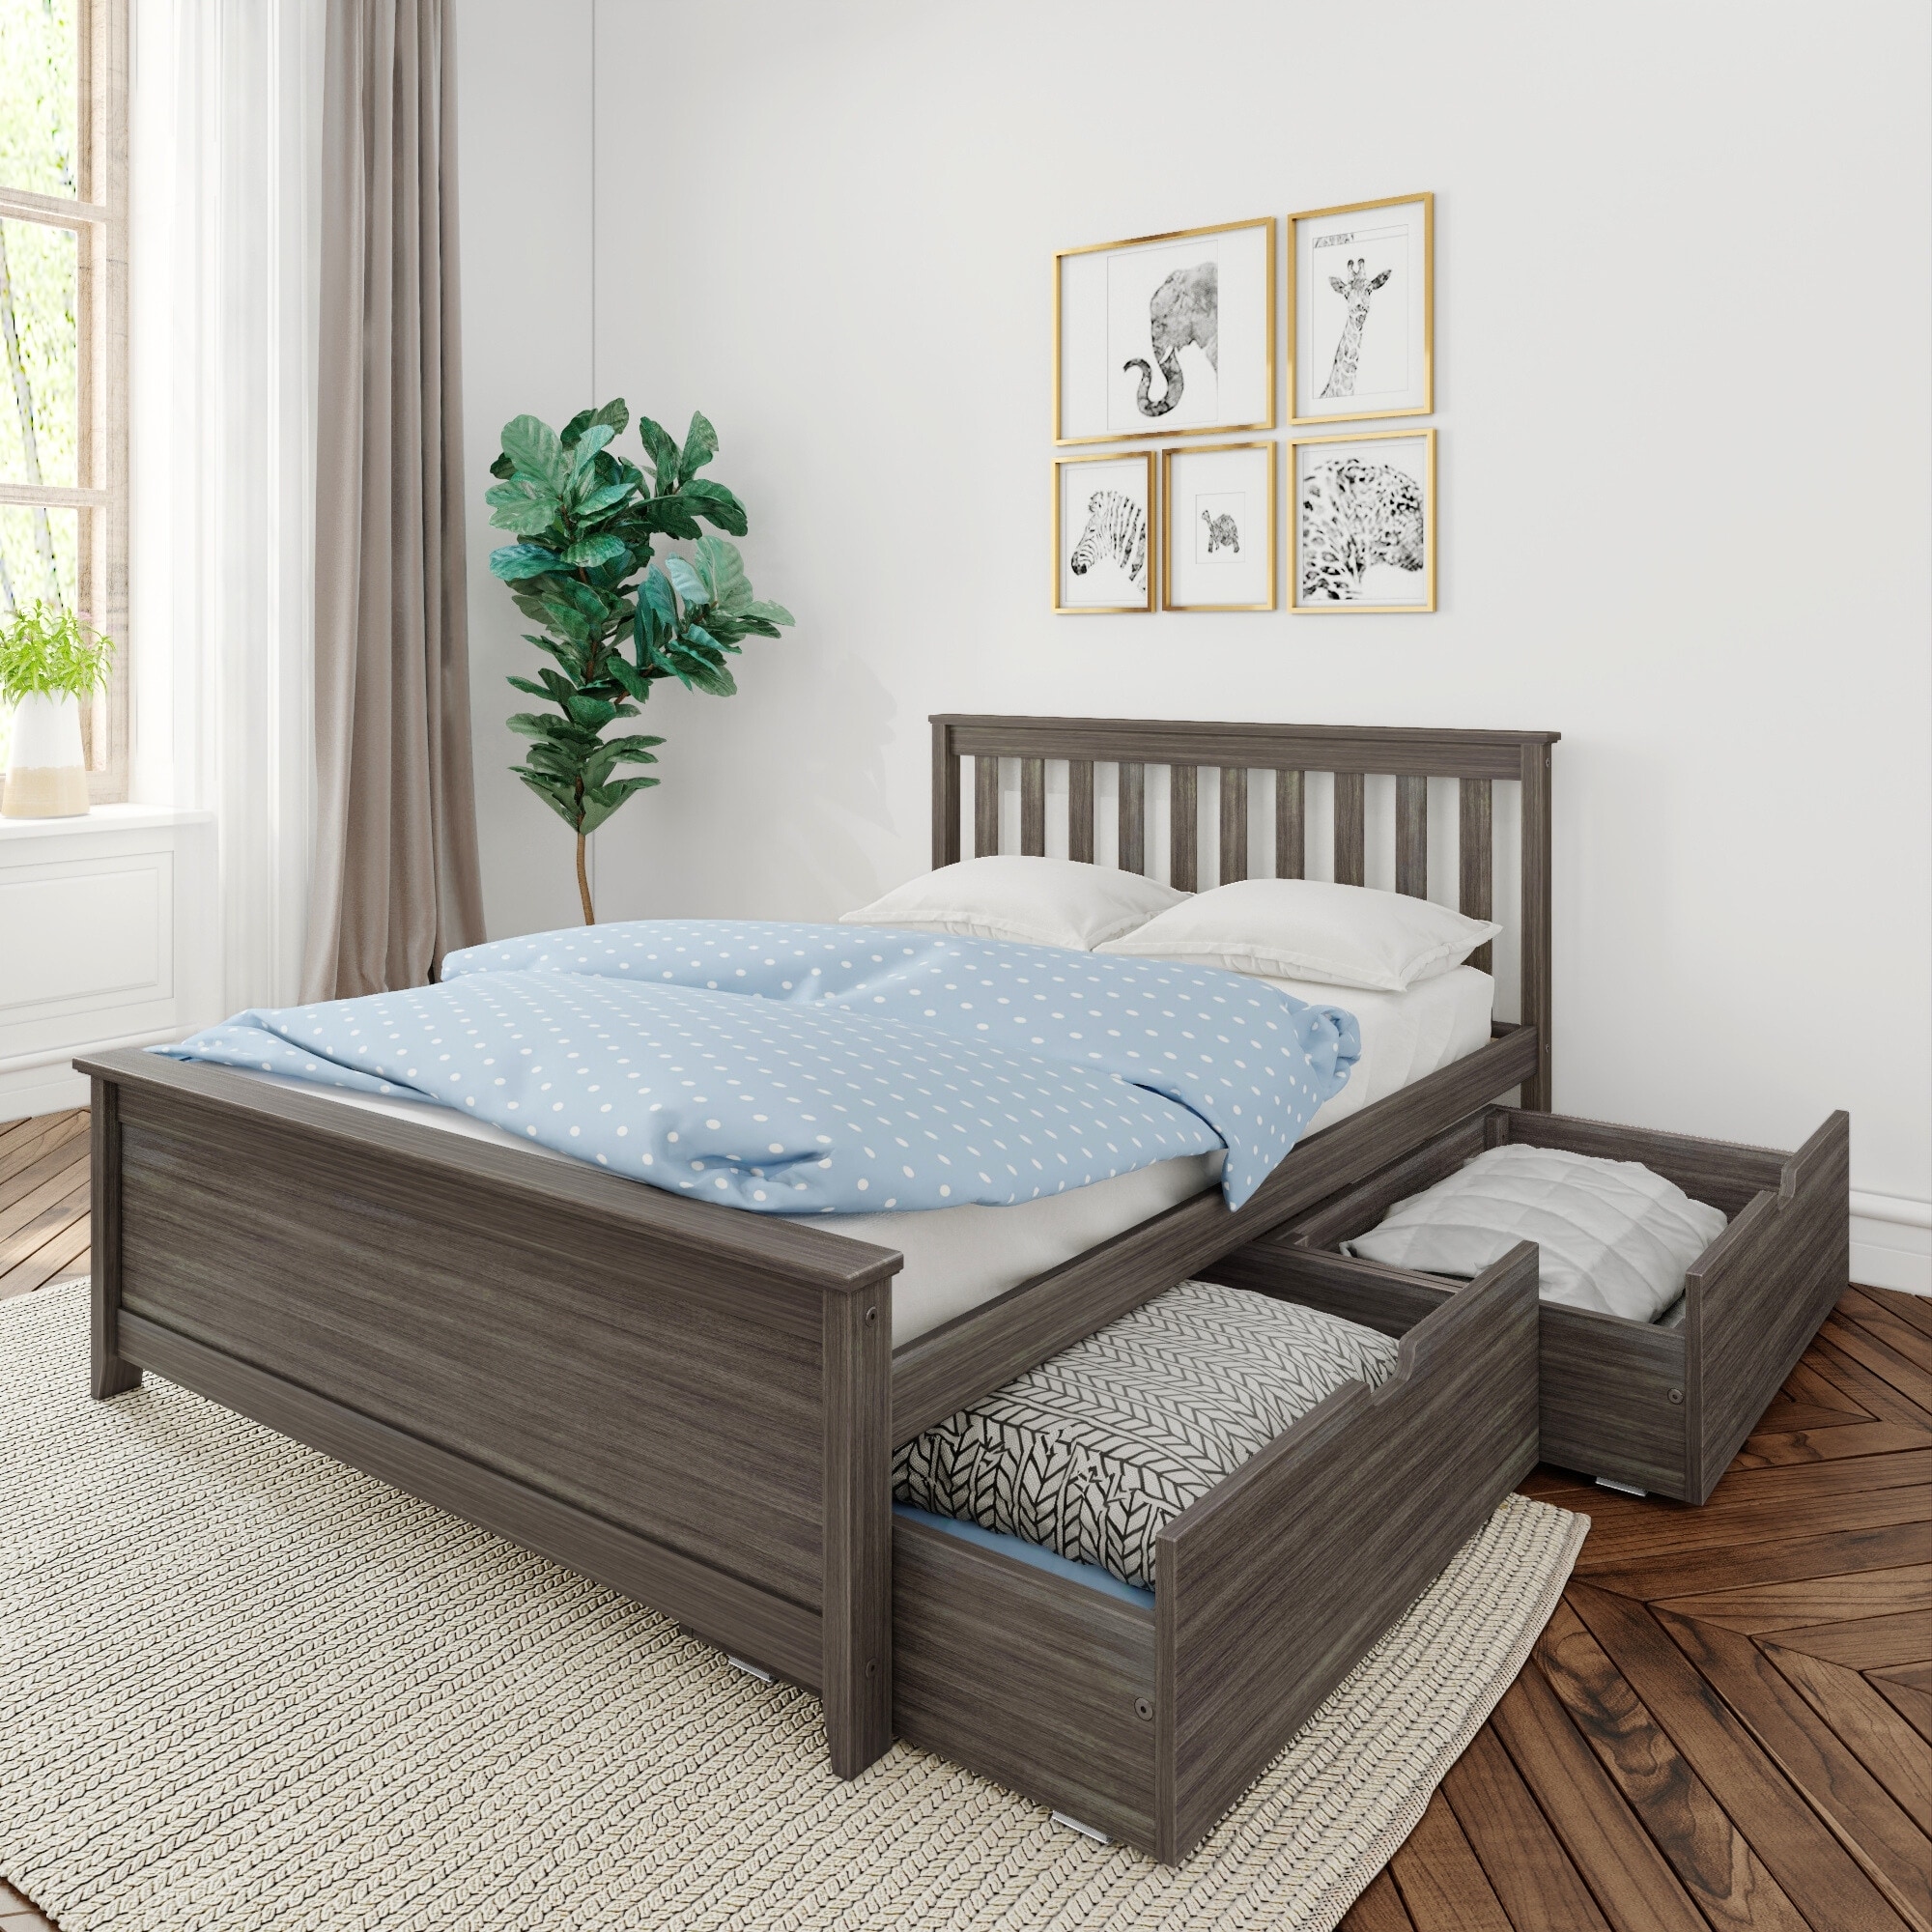 https://ak1.ostkcdn.com/images/products/is/images/direct/c253226bb9740bc2efbf0d7309c6db8e1ff3761f/Max-and-Lily-Full-Bed-with-Under-Bed-Storage-Drawers.jpg